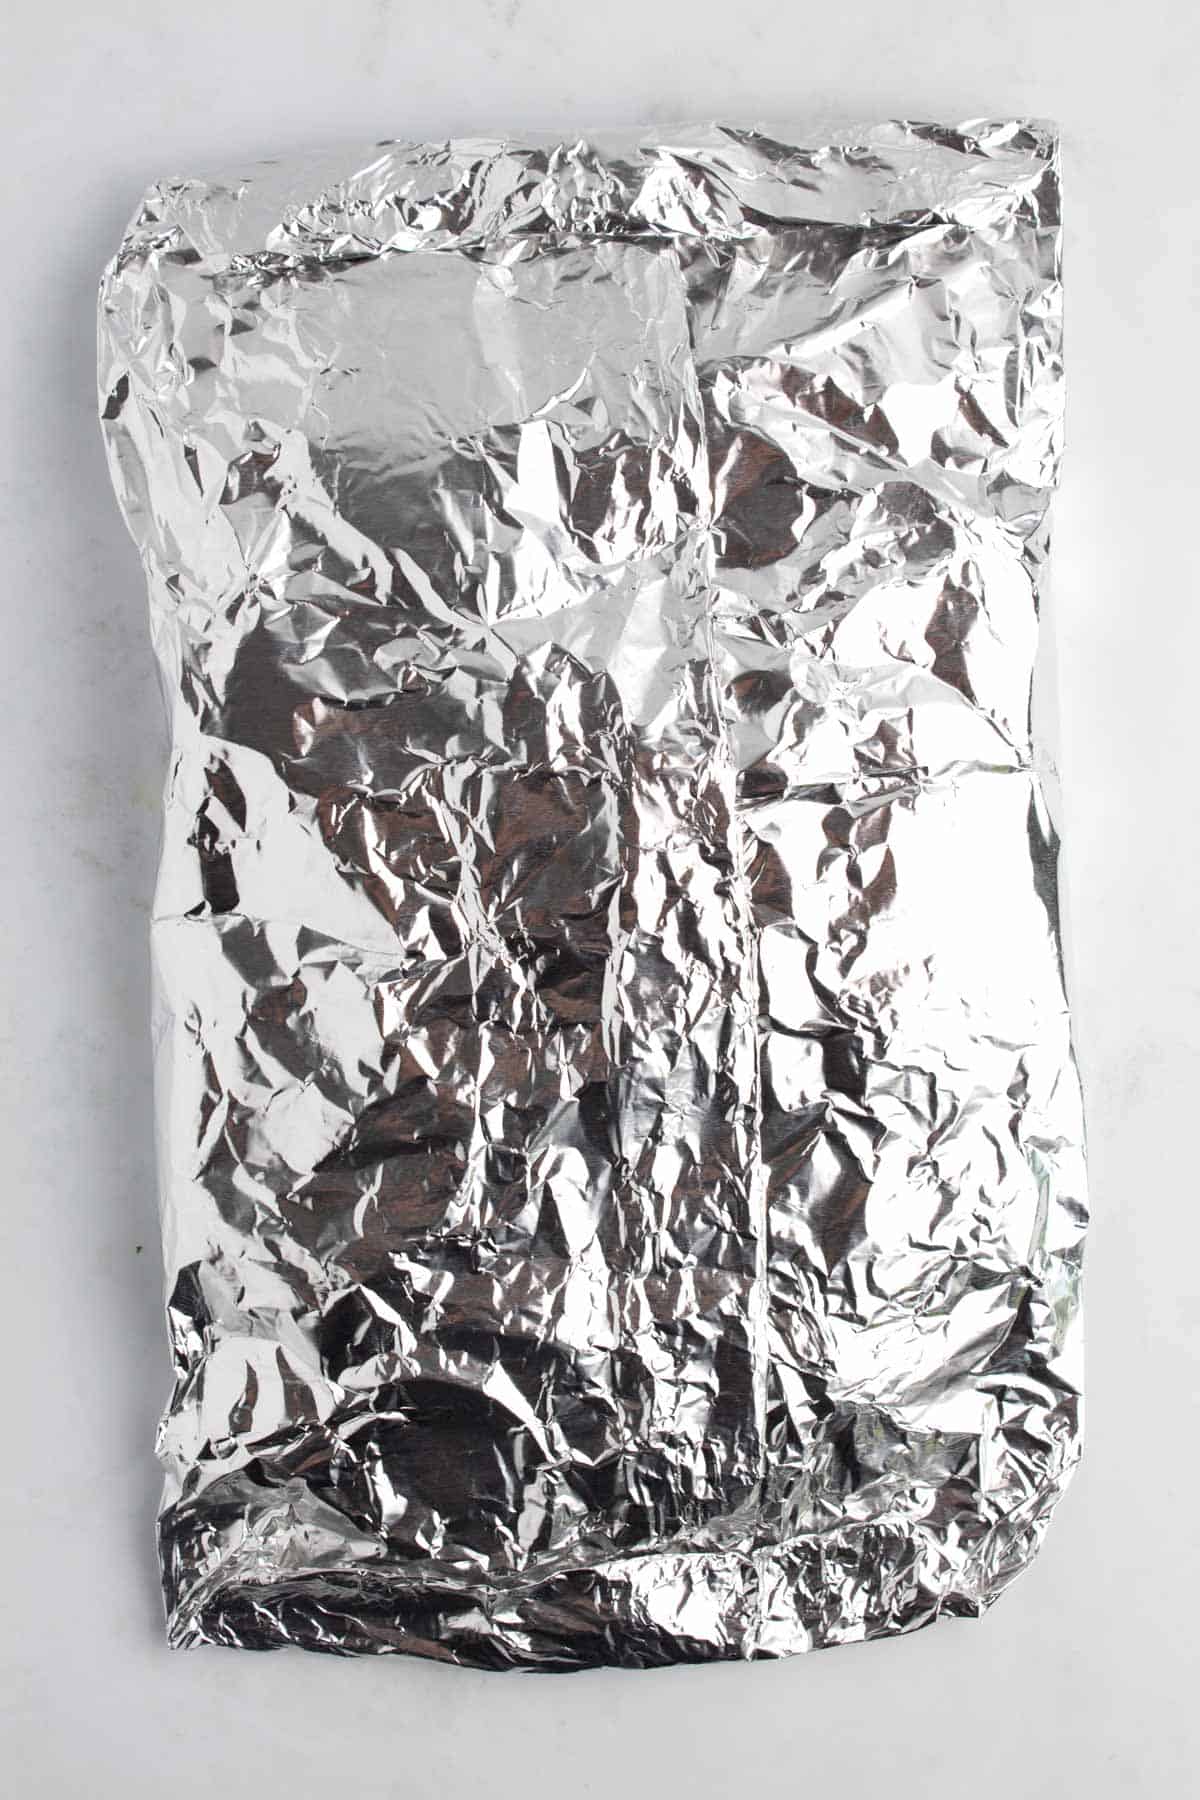 Leakproof aluminum foil packet ready for the fire.